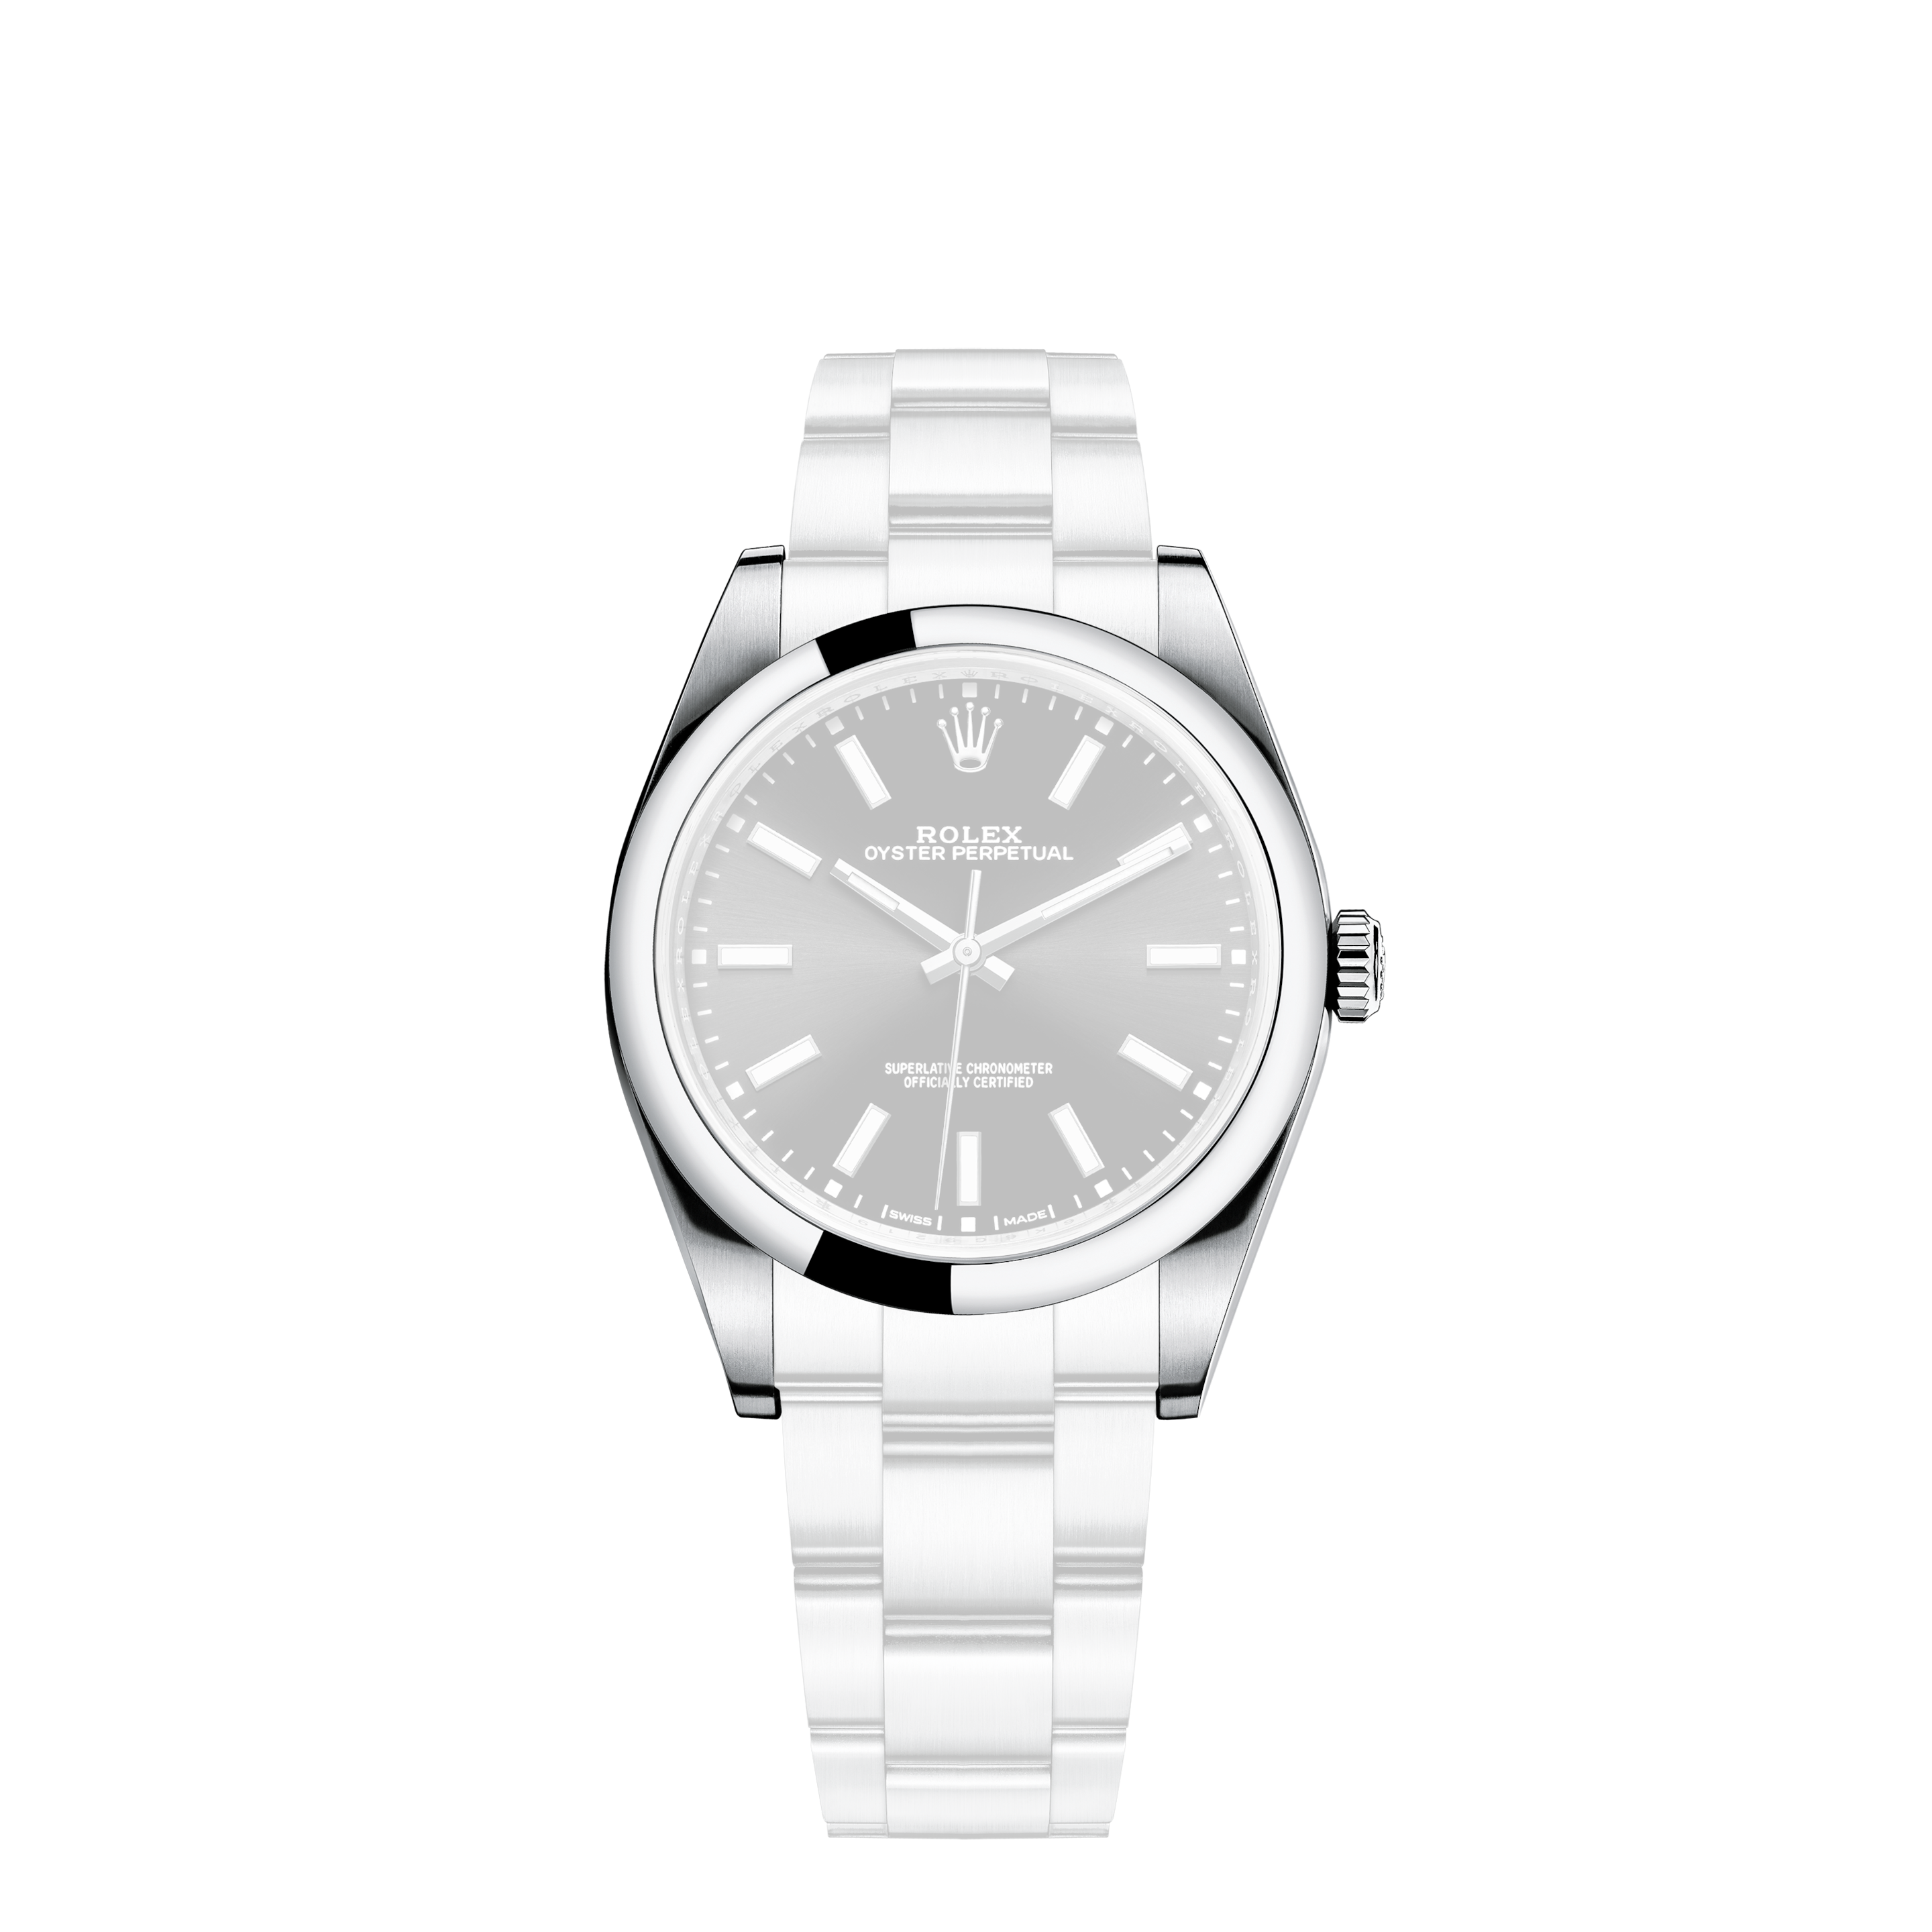 Rolex Oyster Perpetual 1007 in Steel with Engine Turned Bezel on Oyster Bracelet